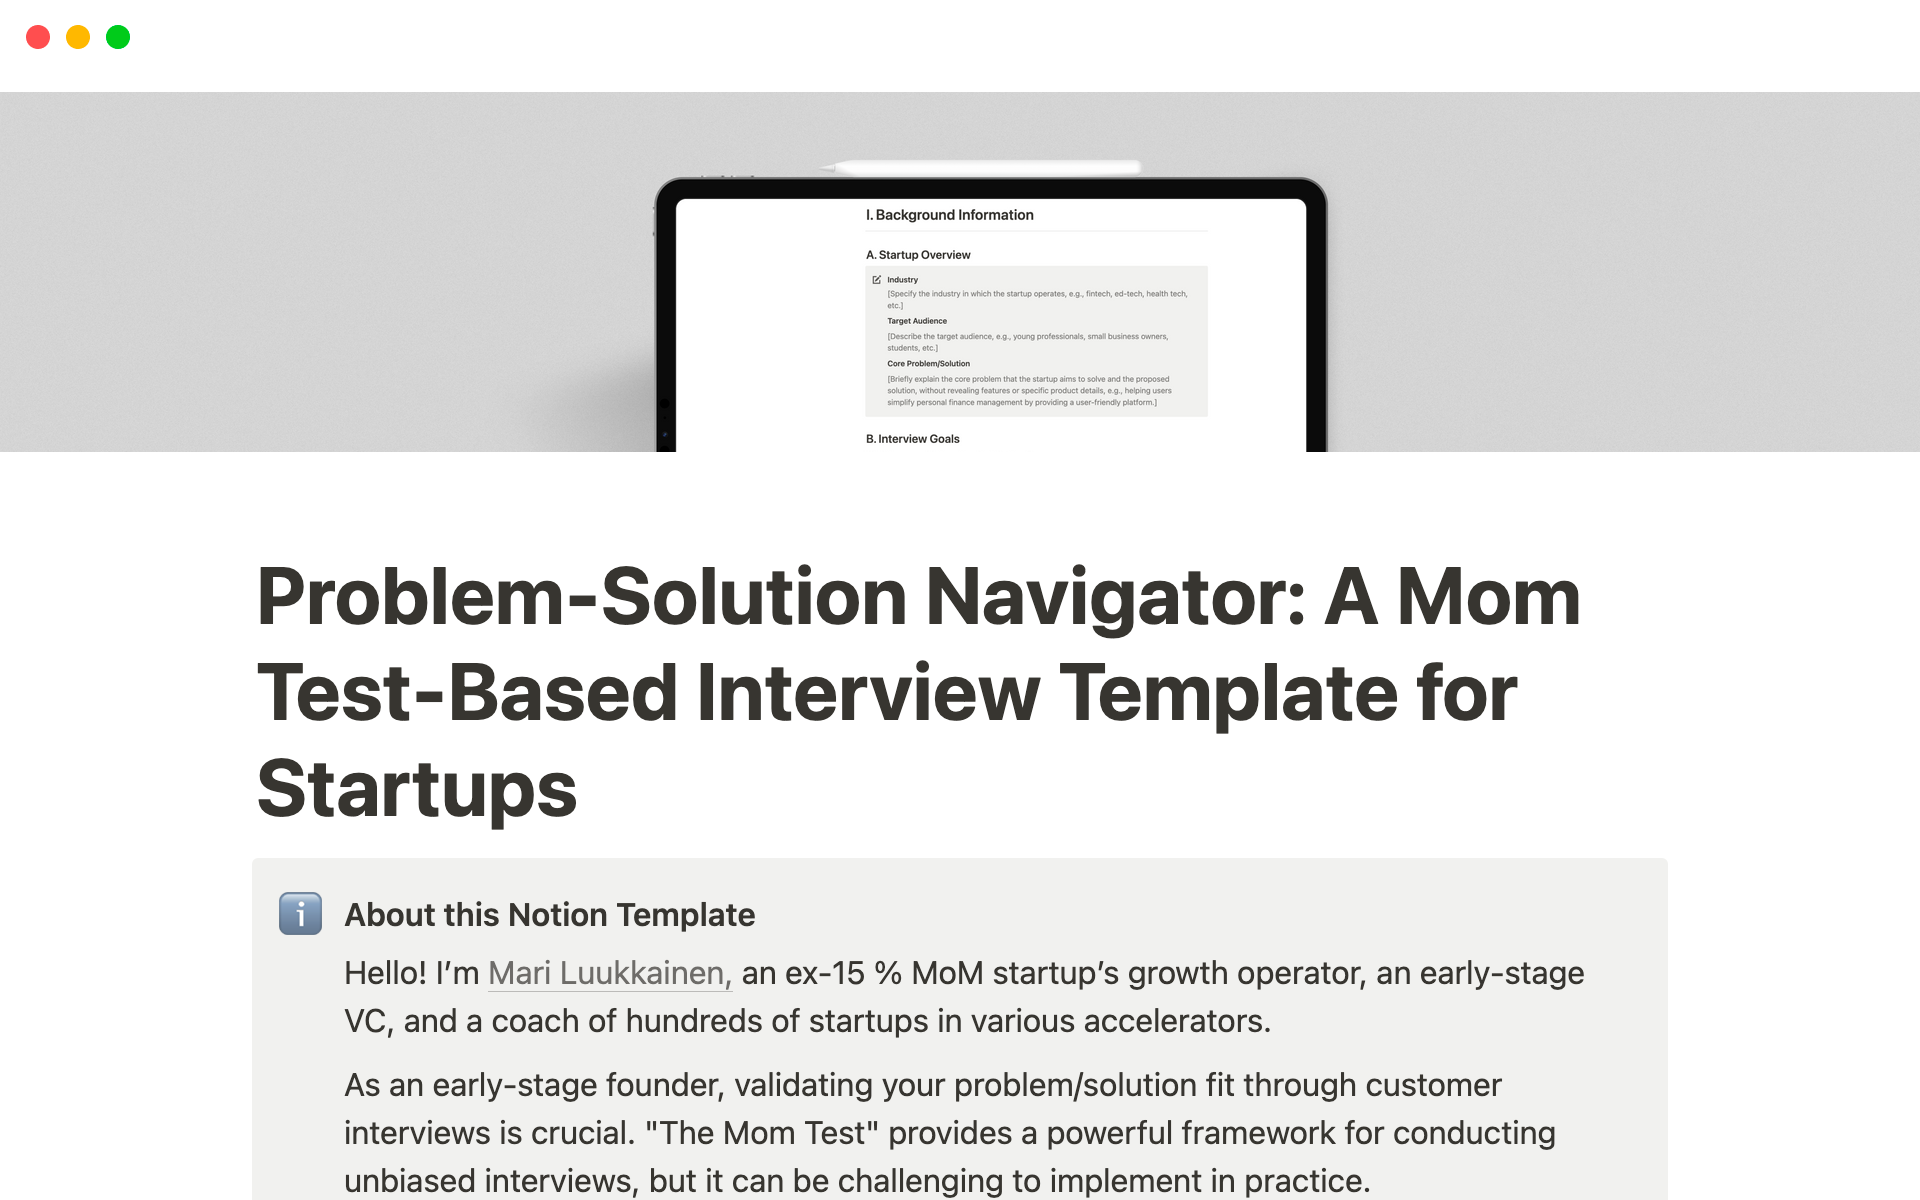 A template preview for Problem-Solution Navigator: A Mom Test-Based Interview Template